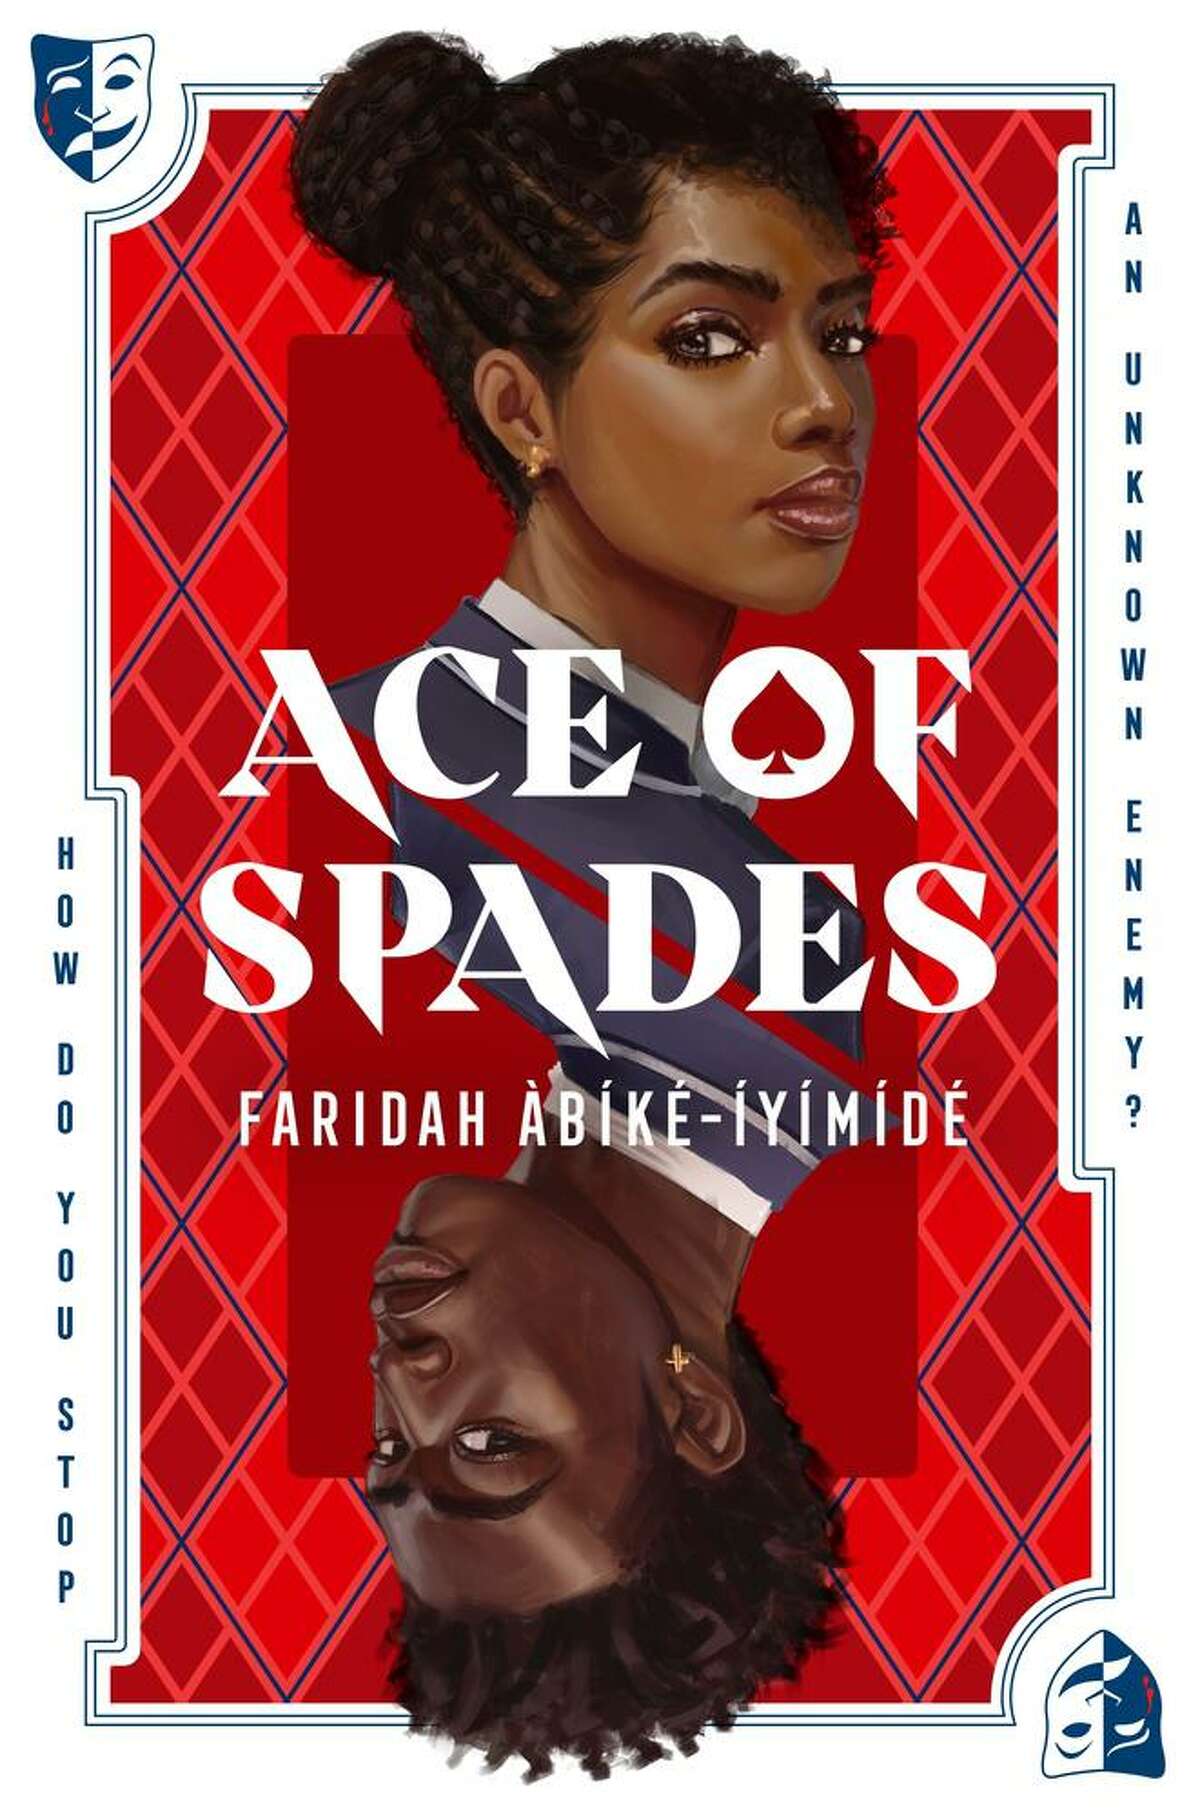 "Ace of Spades" by Faridah Abike-Iyimide